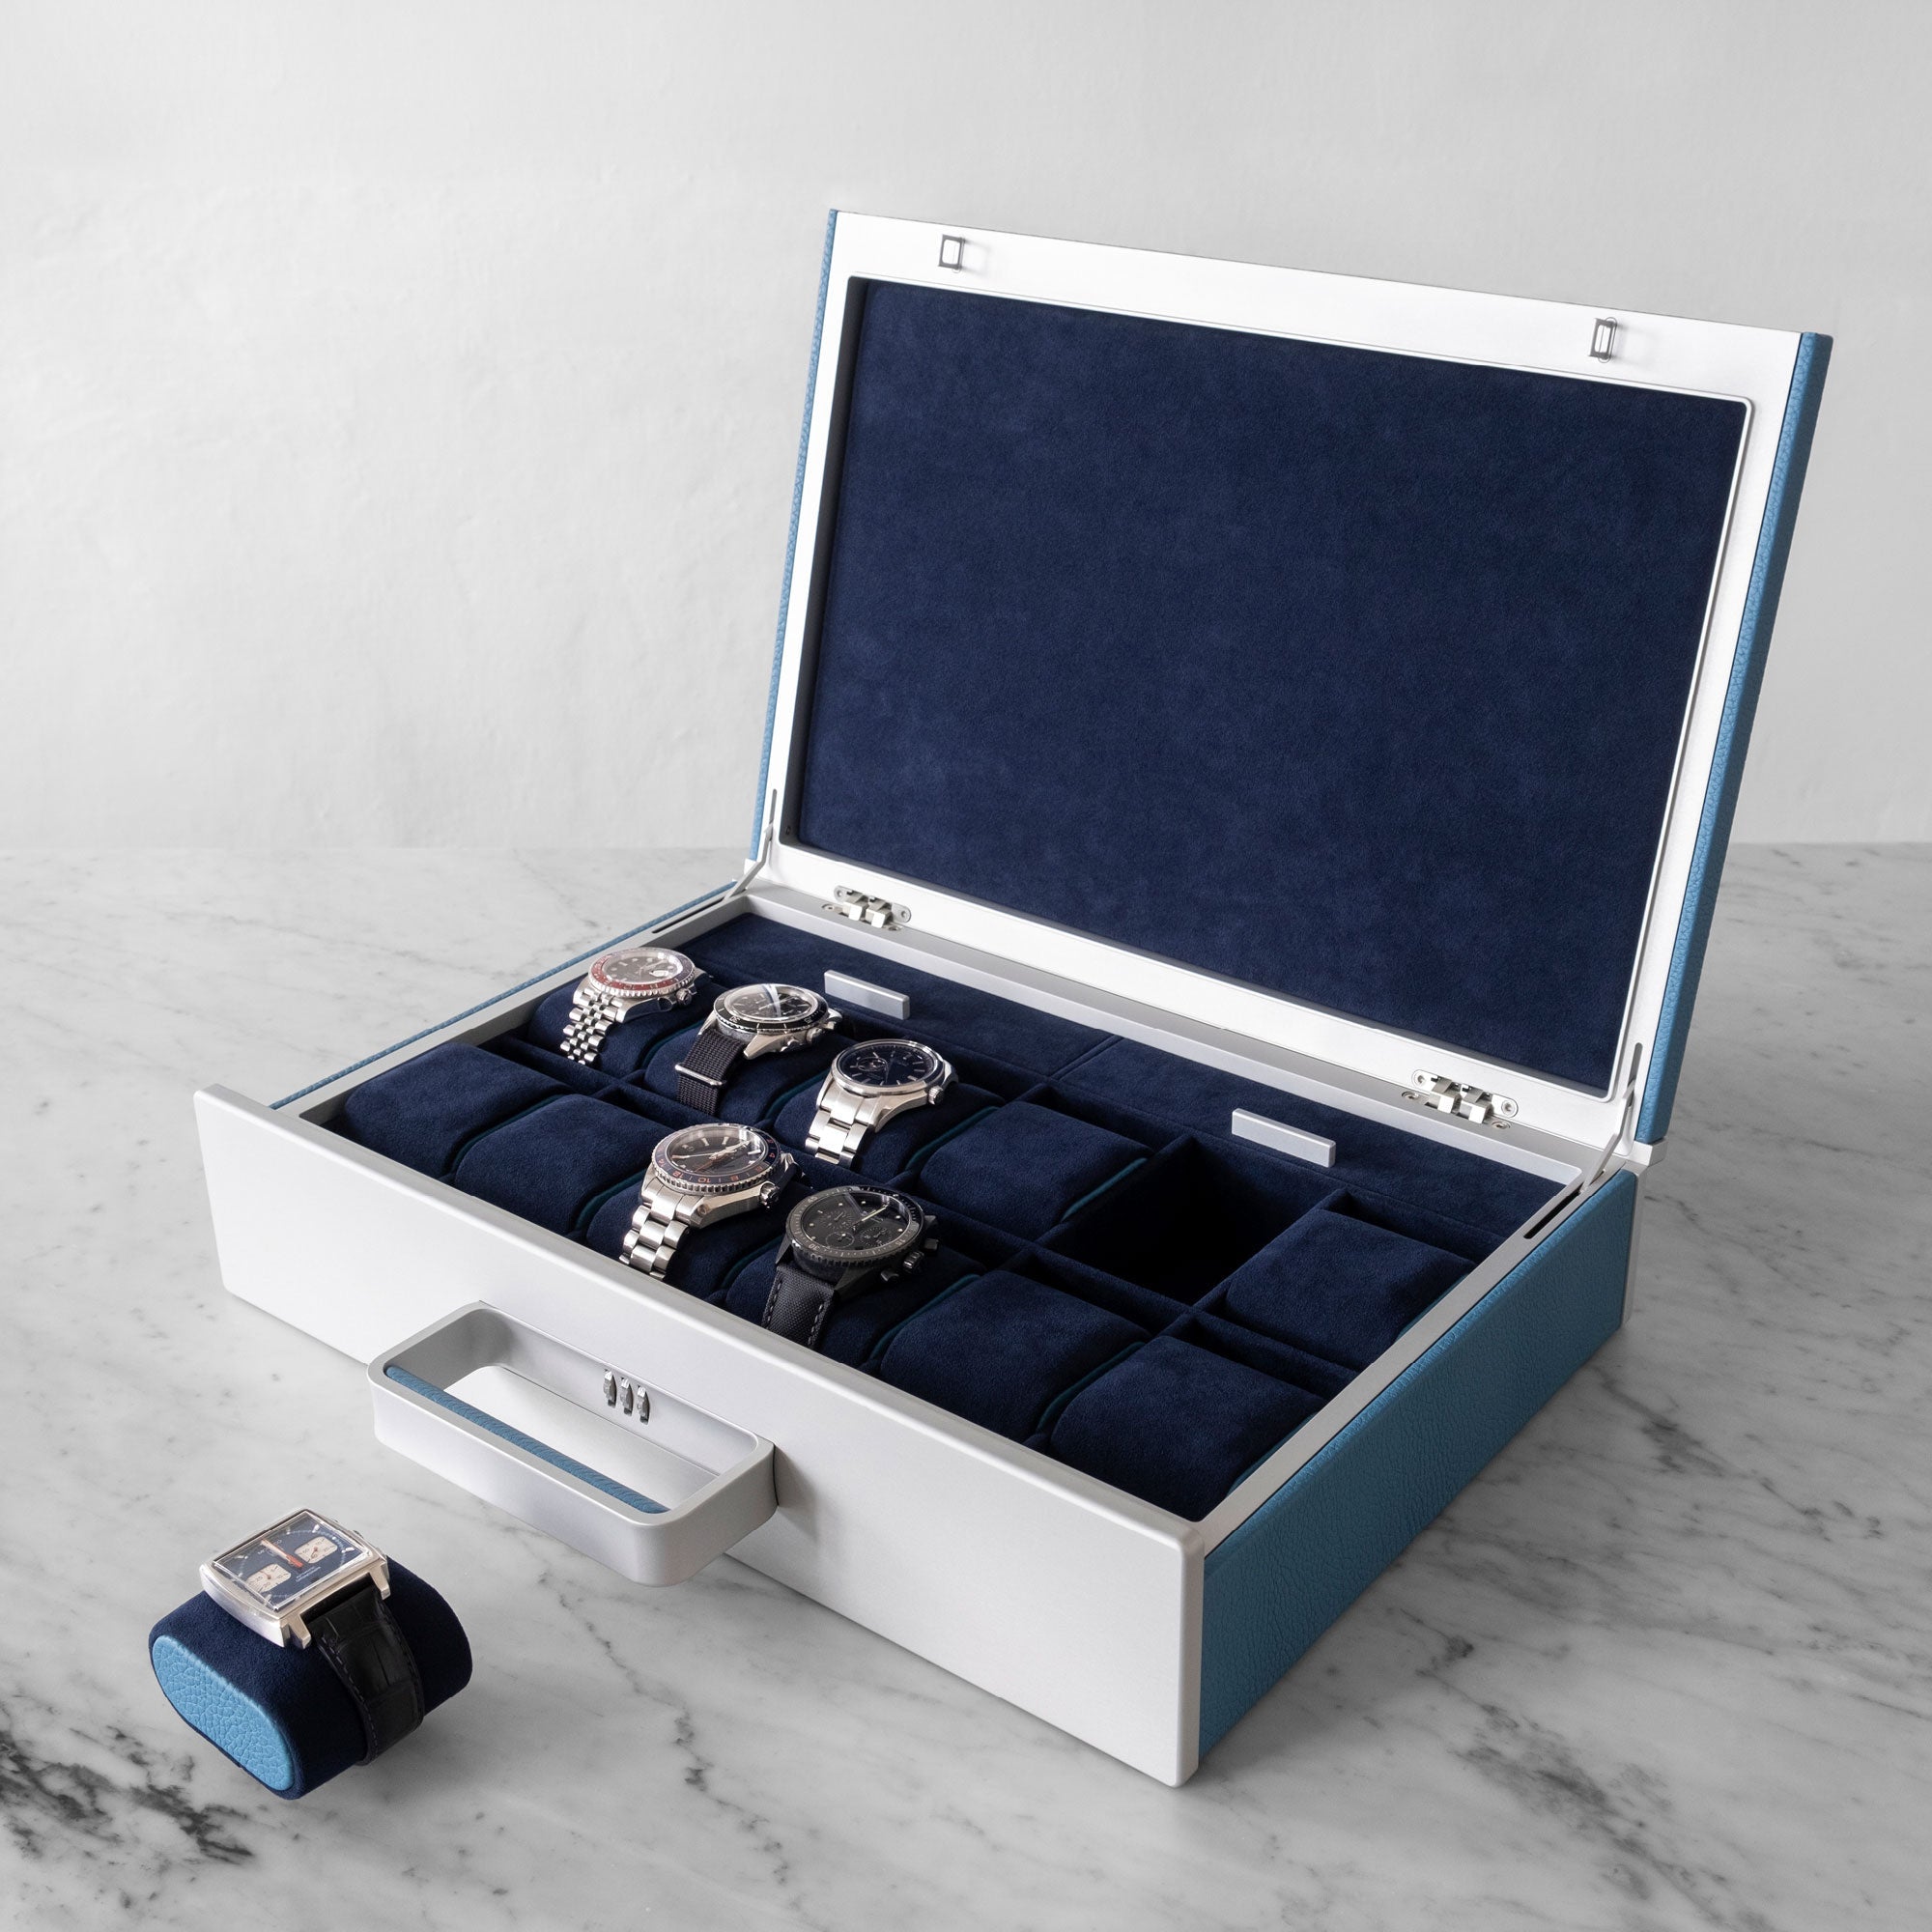 Designer Watch briefcase for 10 watches in sky blue leather, carbon fiber and grey anodized aluminum and deep blue Alcantara interior with luxury watches including Tag Heuer, Rolex, Blancpain and Omega